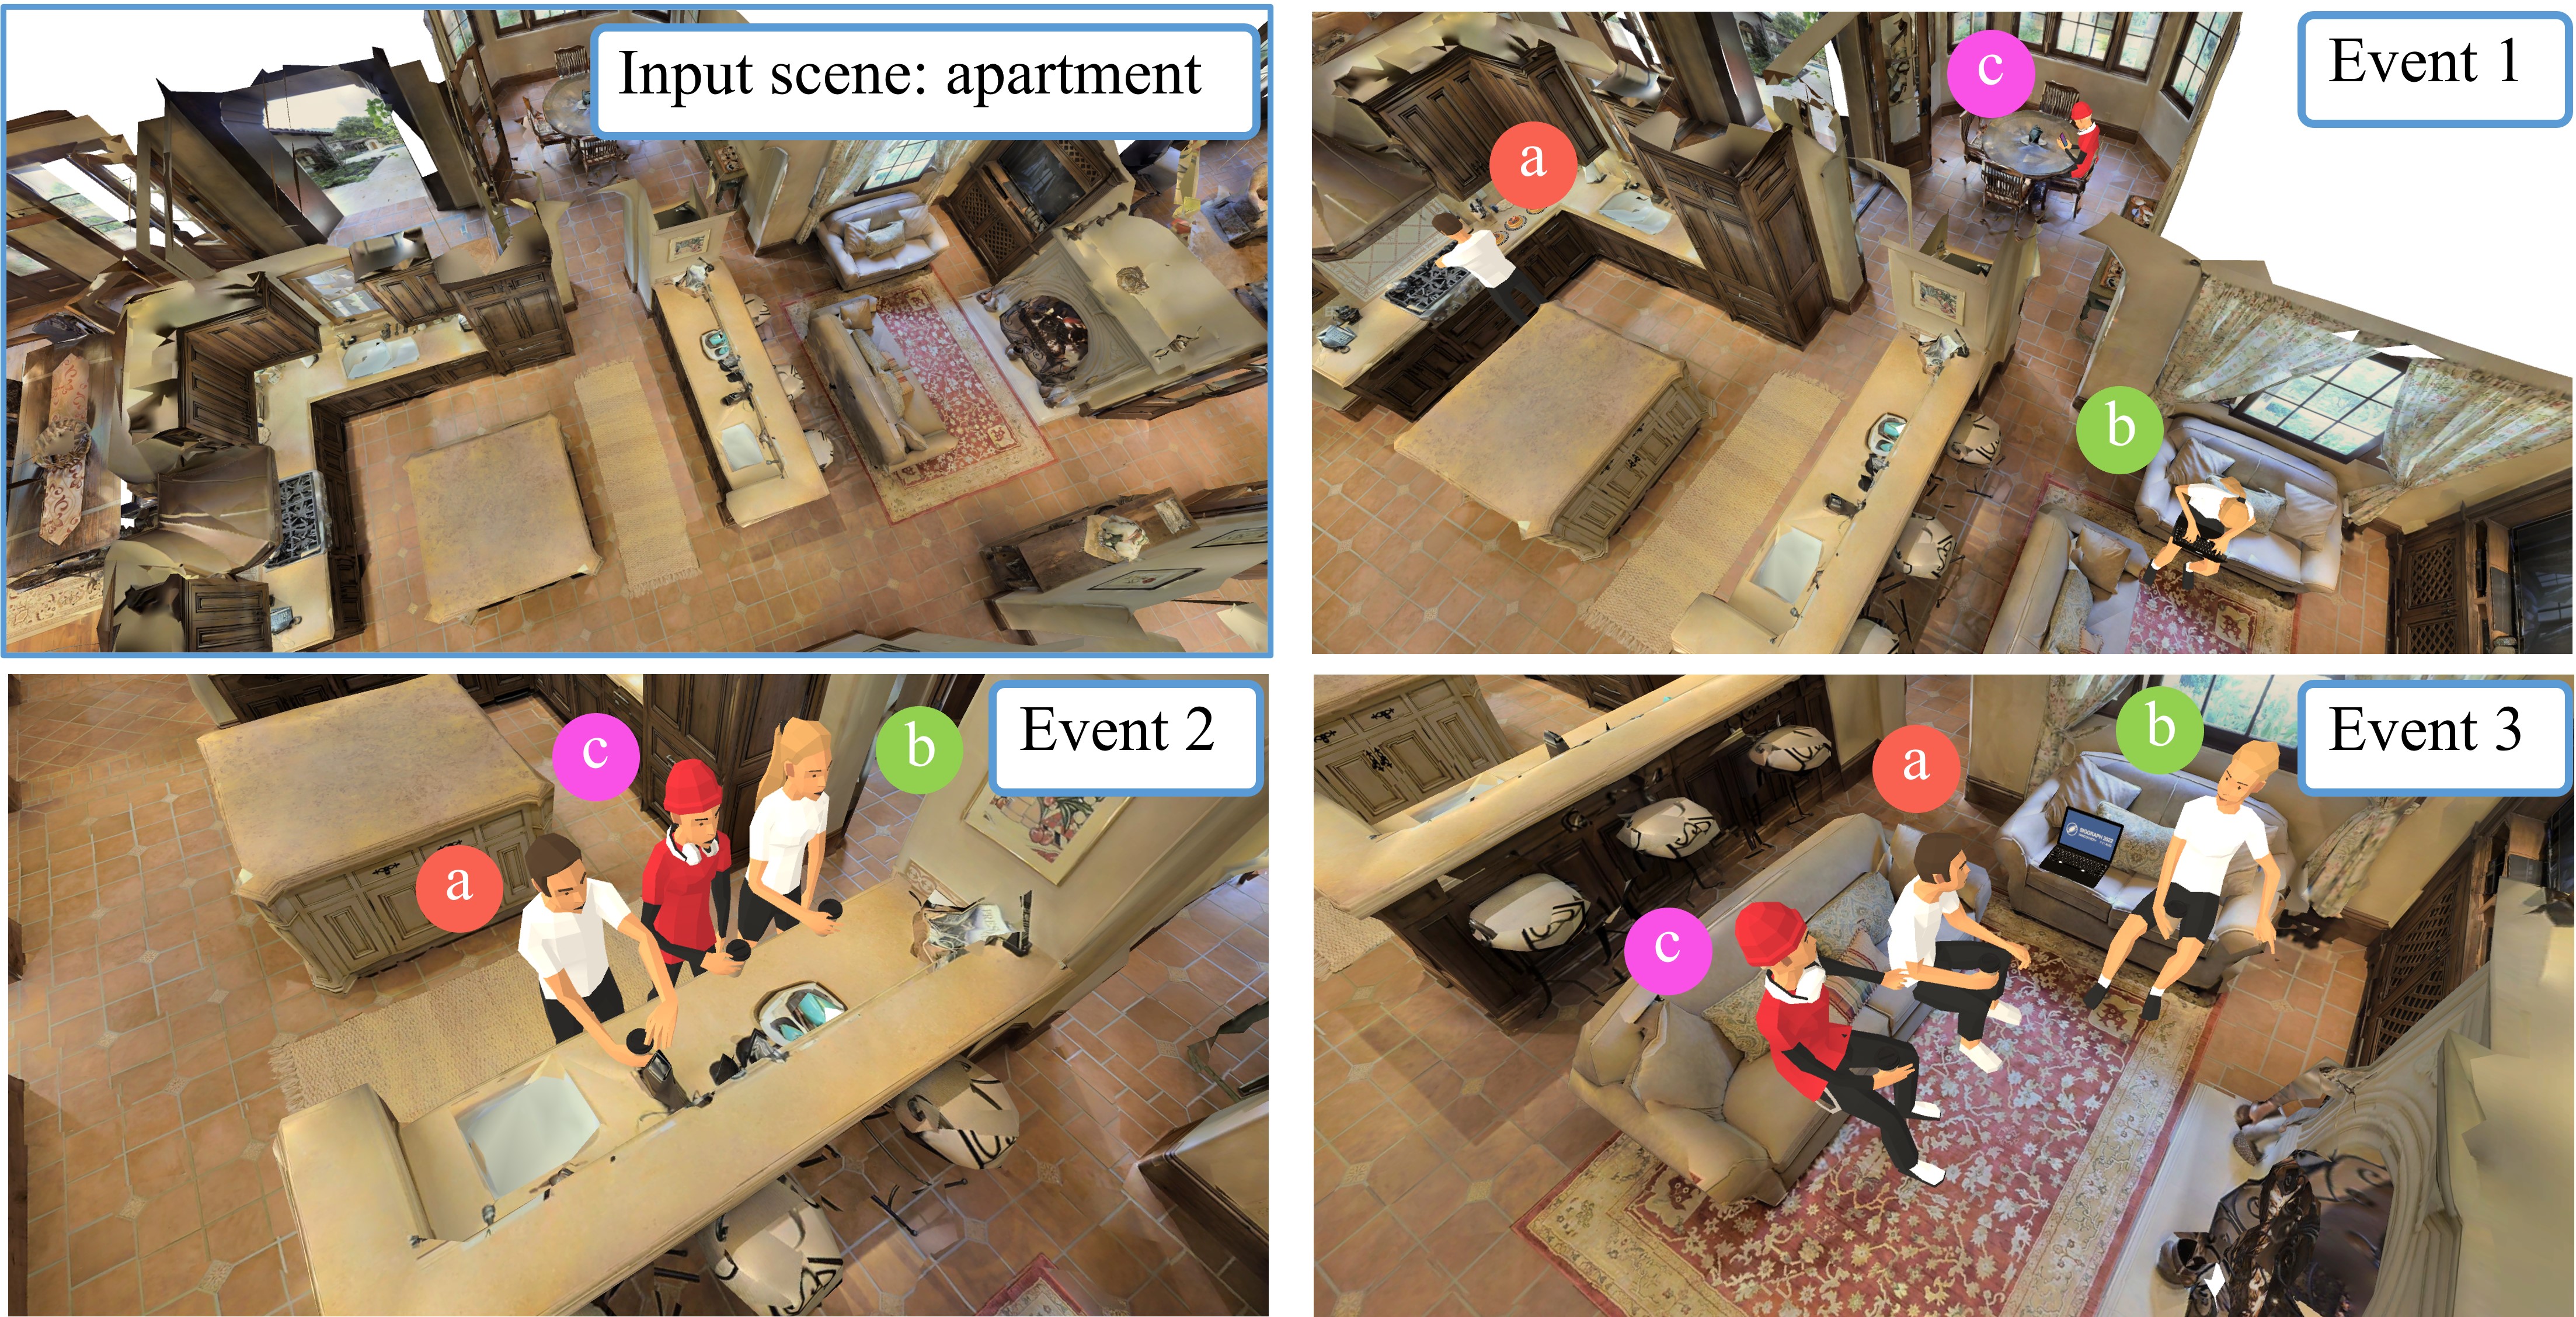 Our approach can retarget the same story to different scenes of a specific type. The virtual apartment scene is from the Matterport3D dataset (https://niessner.github.io/Matterport).